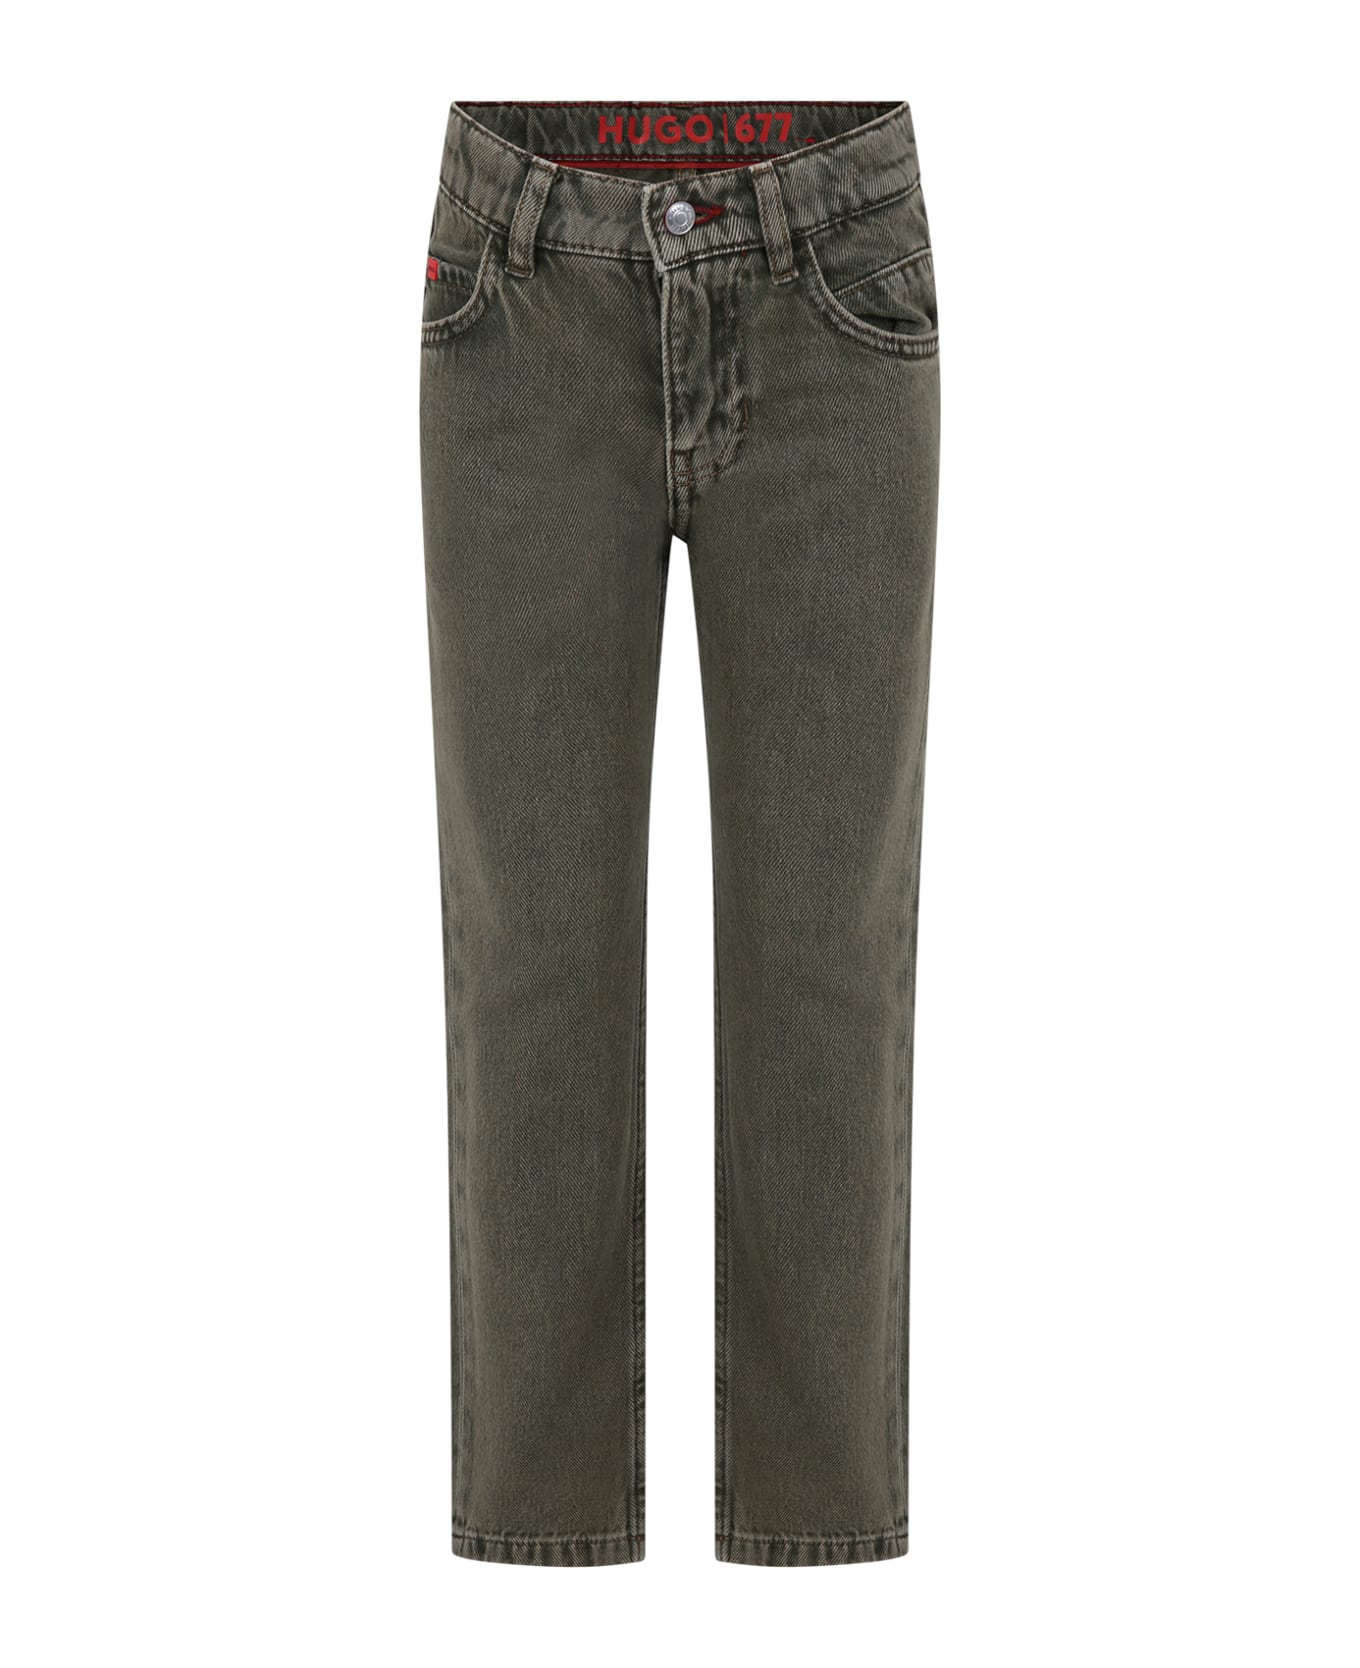 Hugo Boss Green Jeans For Boy With Logo - Green